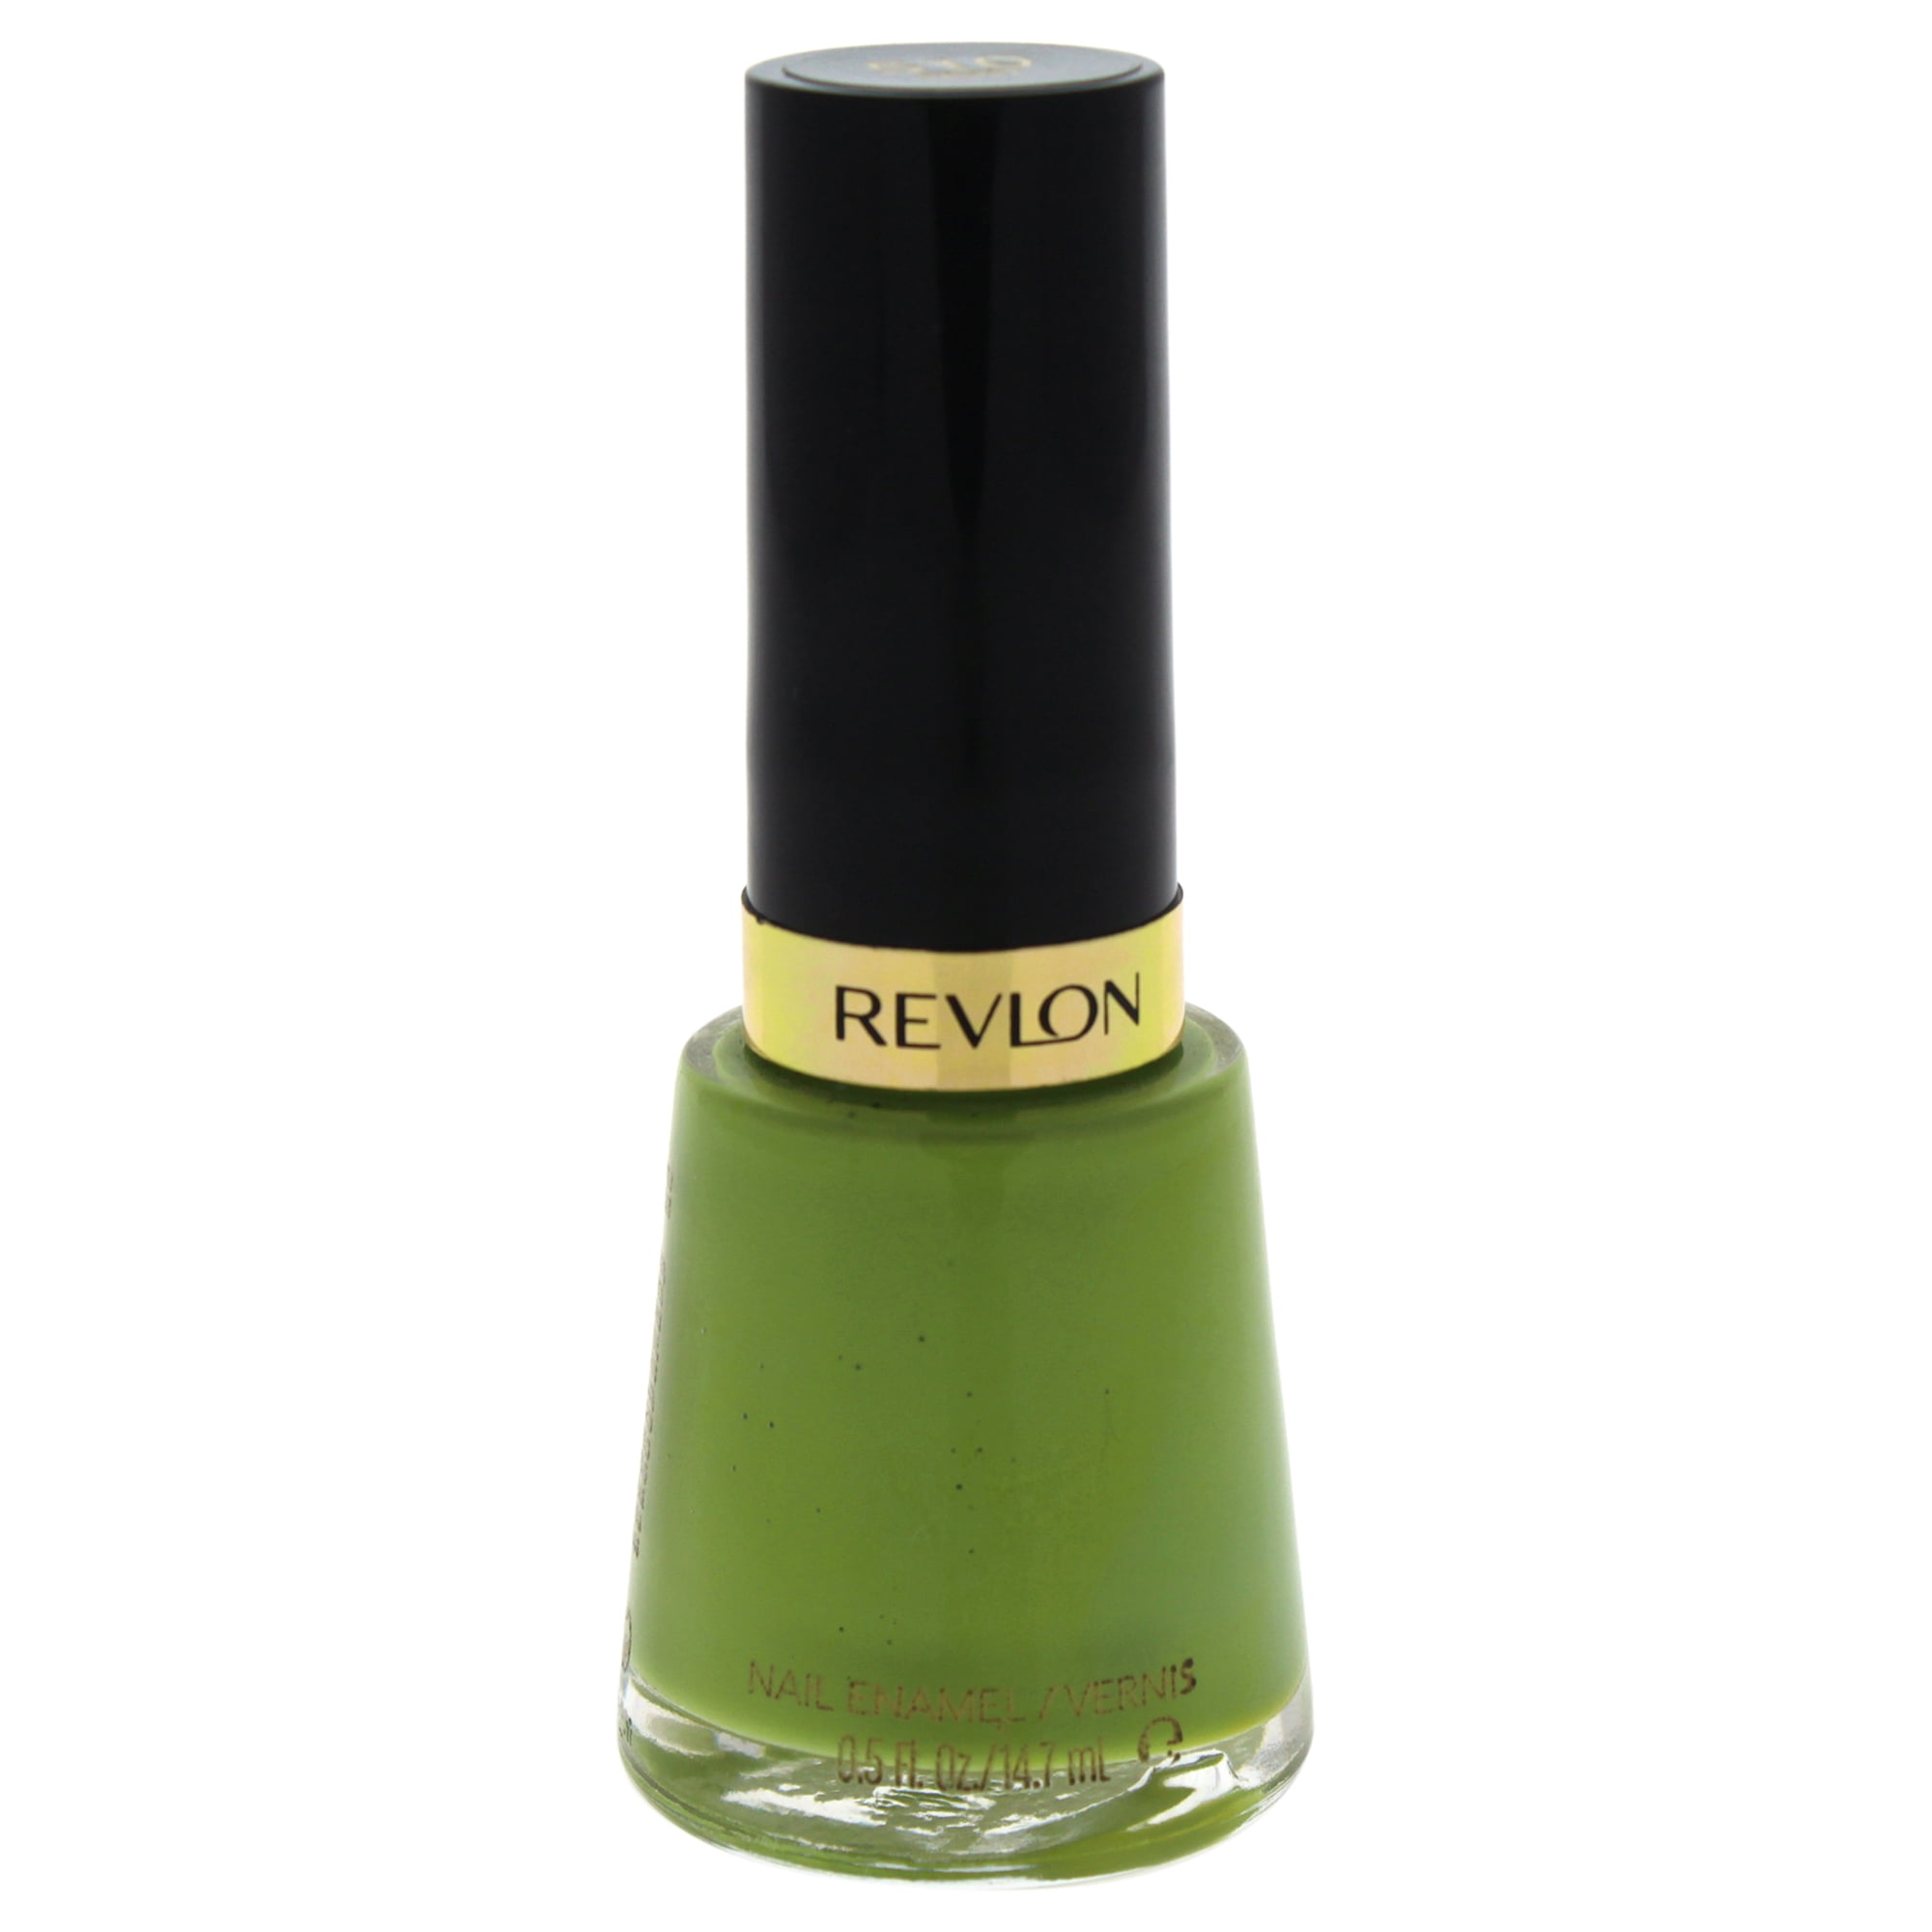 Revlon - The way the sunlight hits this polish… we can't stop looking at  our fingertips! Try #Revlon Nail Enamel in Hologasm, part of our new  #Holochrome collection! #BoldLooks Shop now at